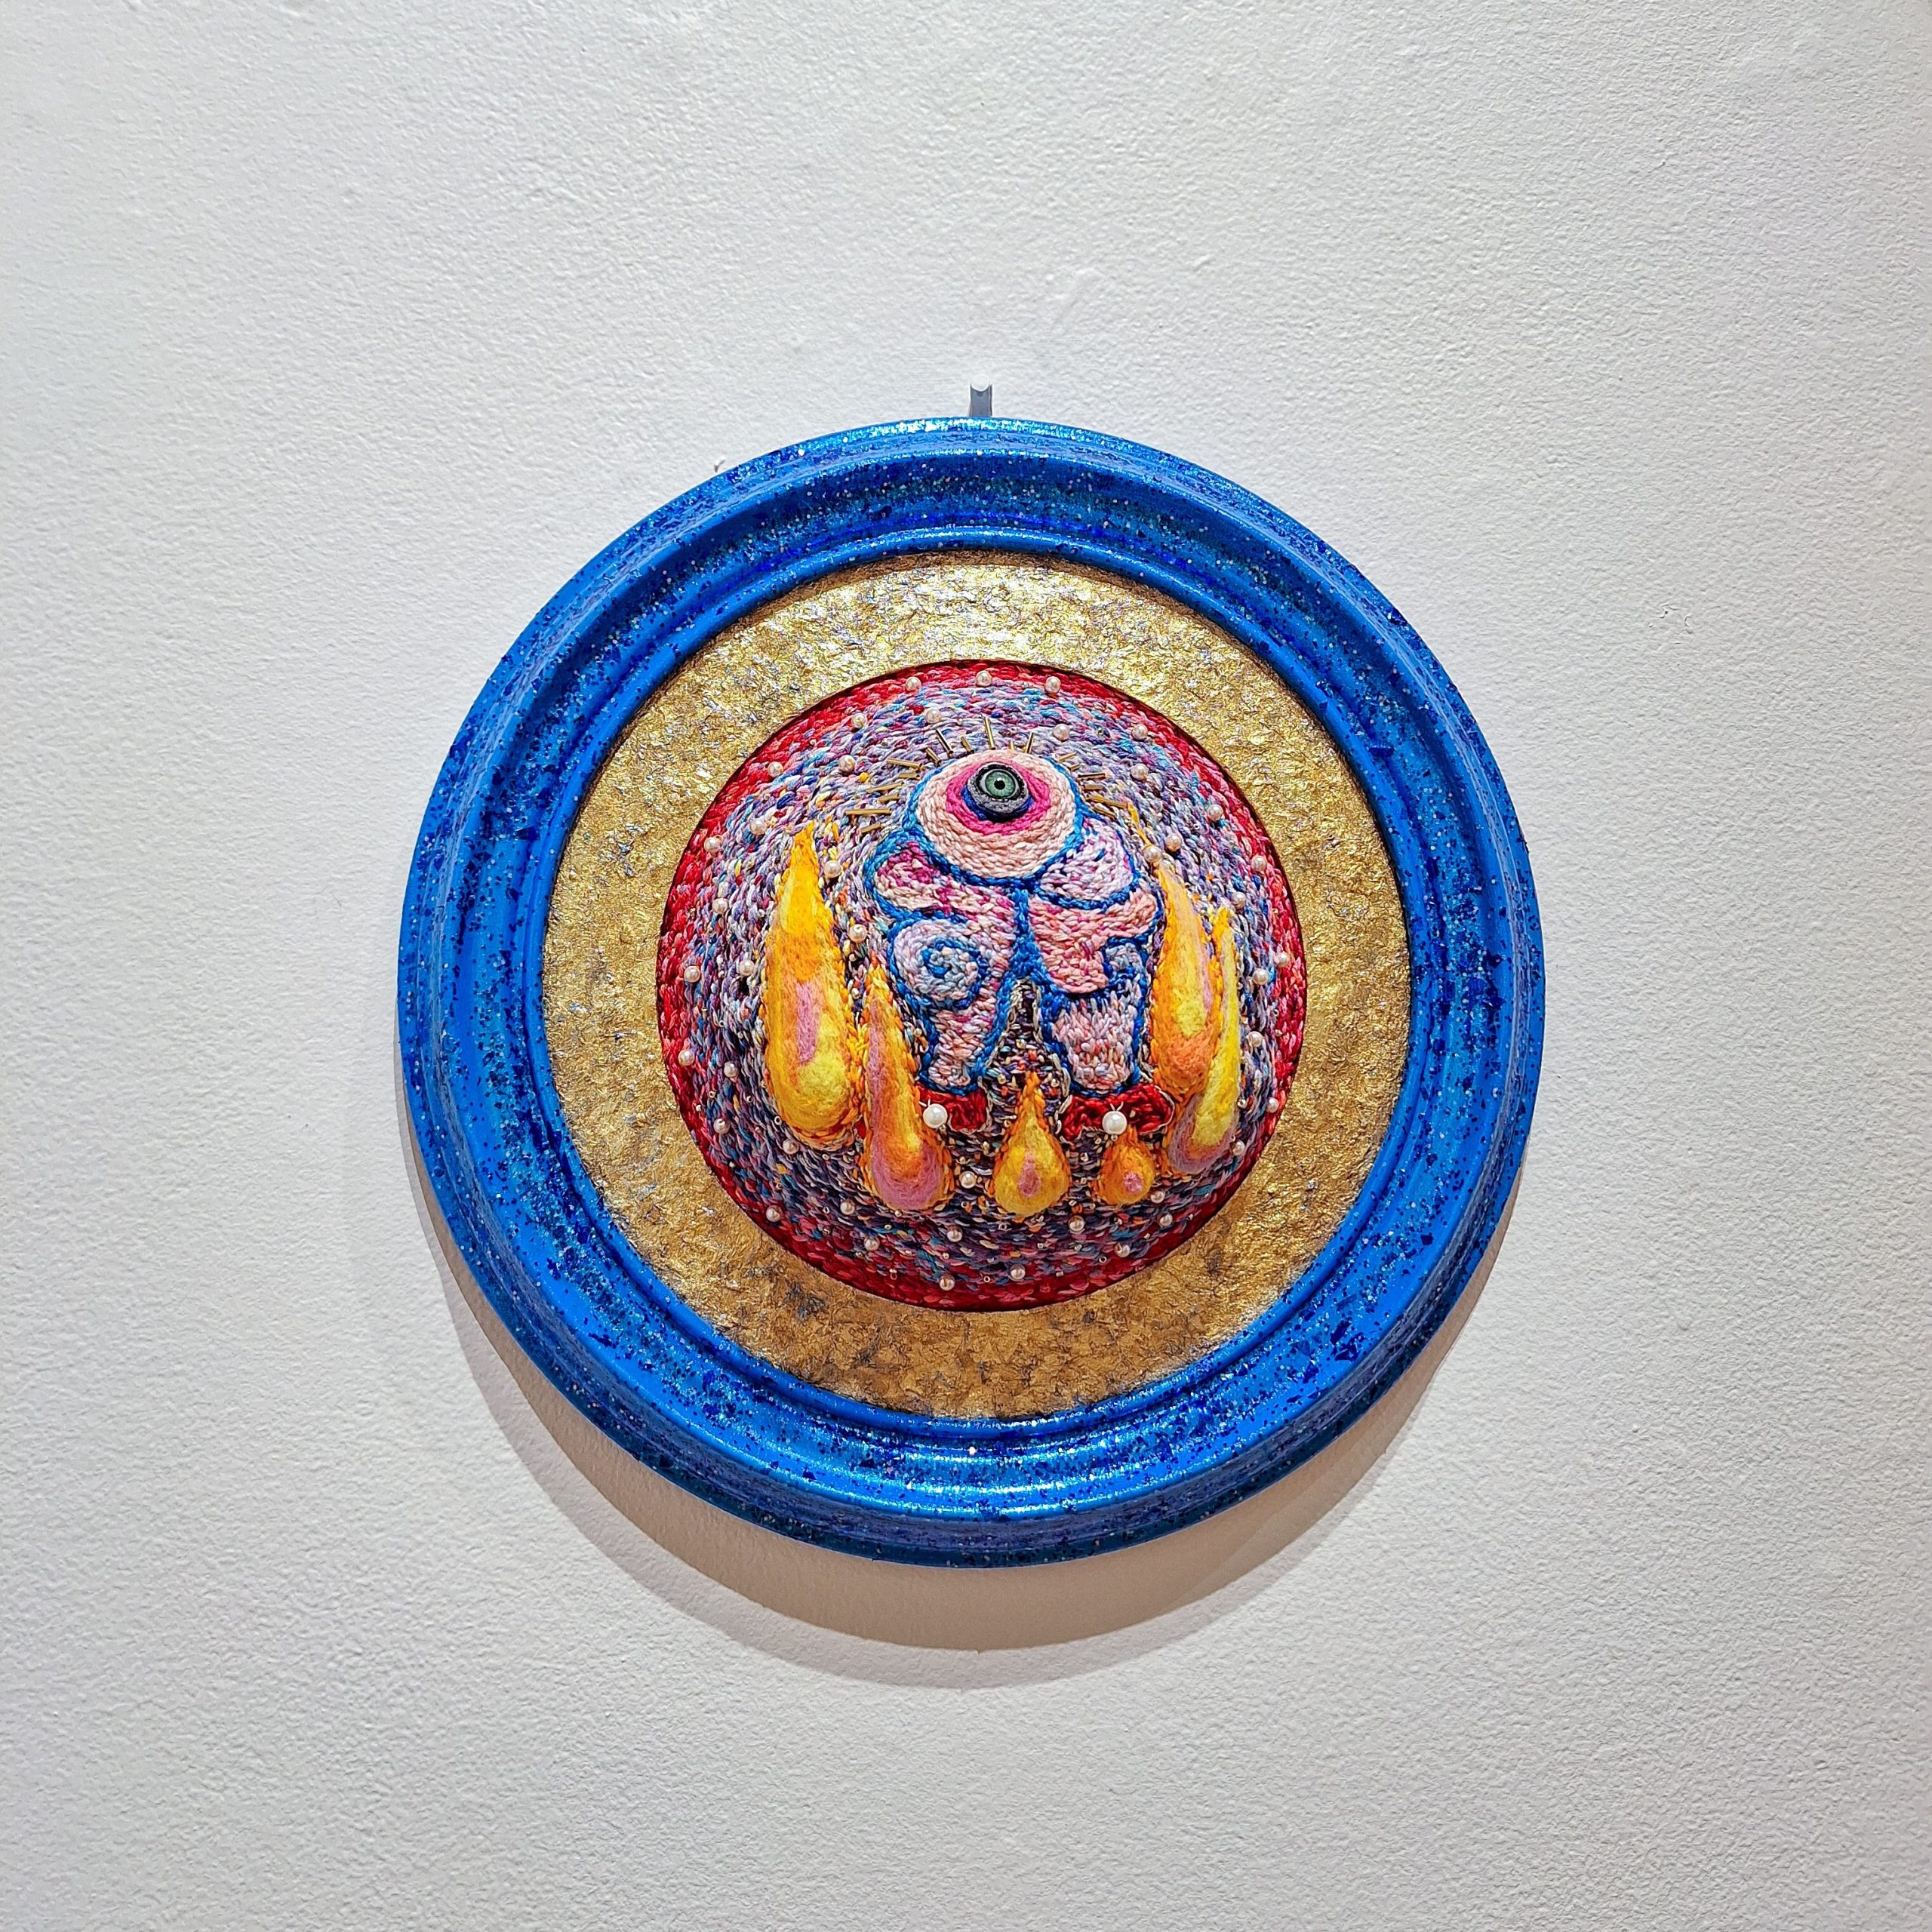 Kaitlyn Hunter, "Burn Bright Darling," 2023-24. Embroidery and felting, 13 in x 13 in x 5 in. Part of "(T)HERE BUT NOT: The 2024 University of Southern Maine Art Department Exhibition," Installation view, 2024. University of Southern Maine Art Gallery.